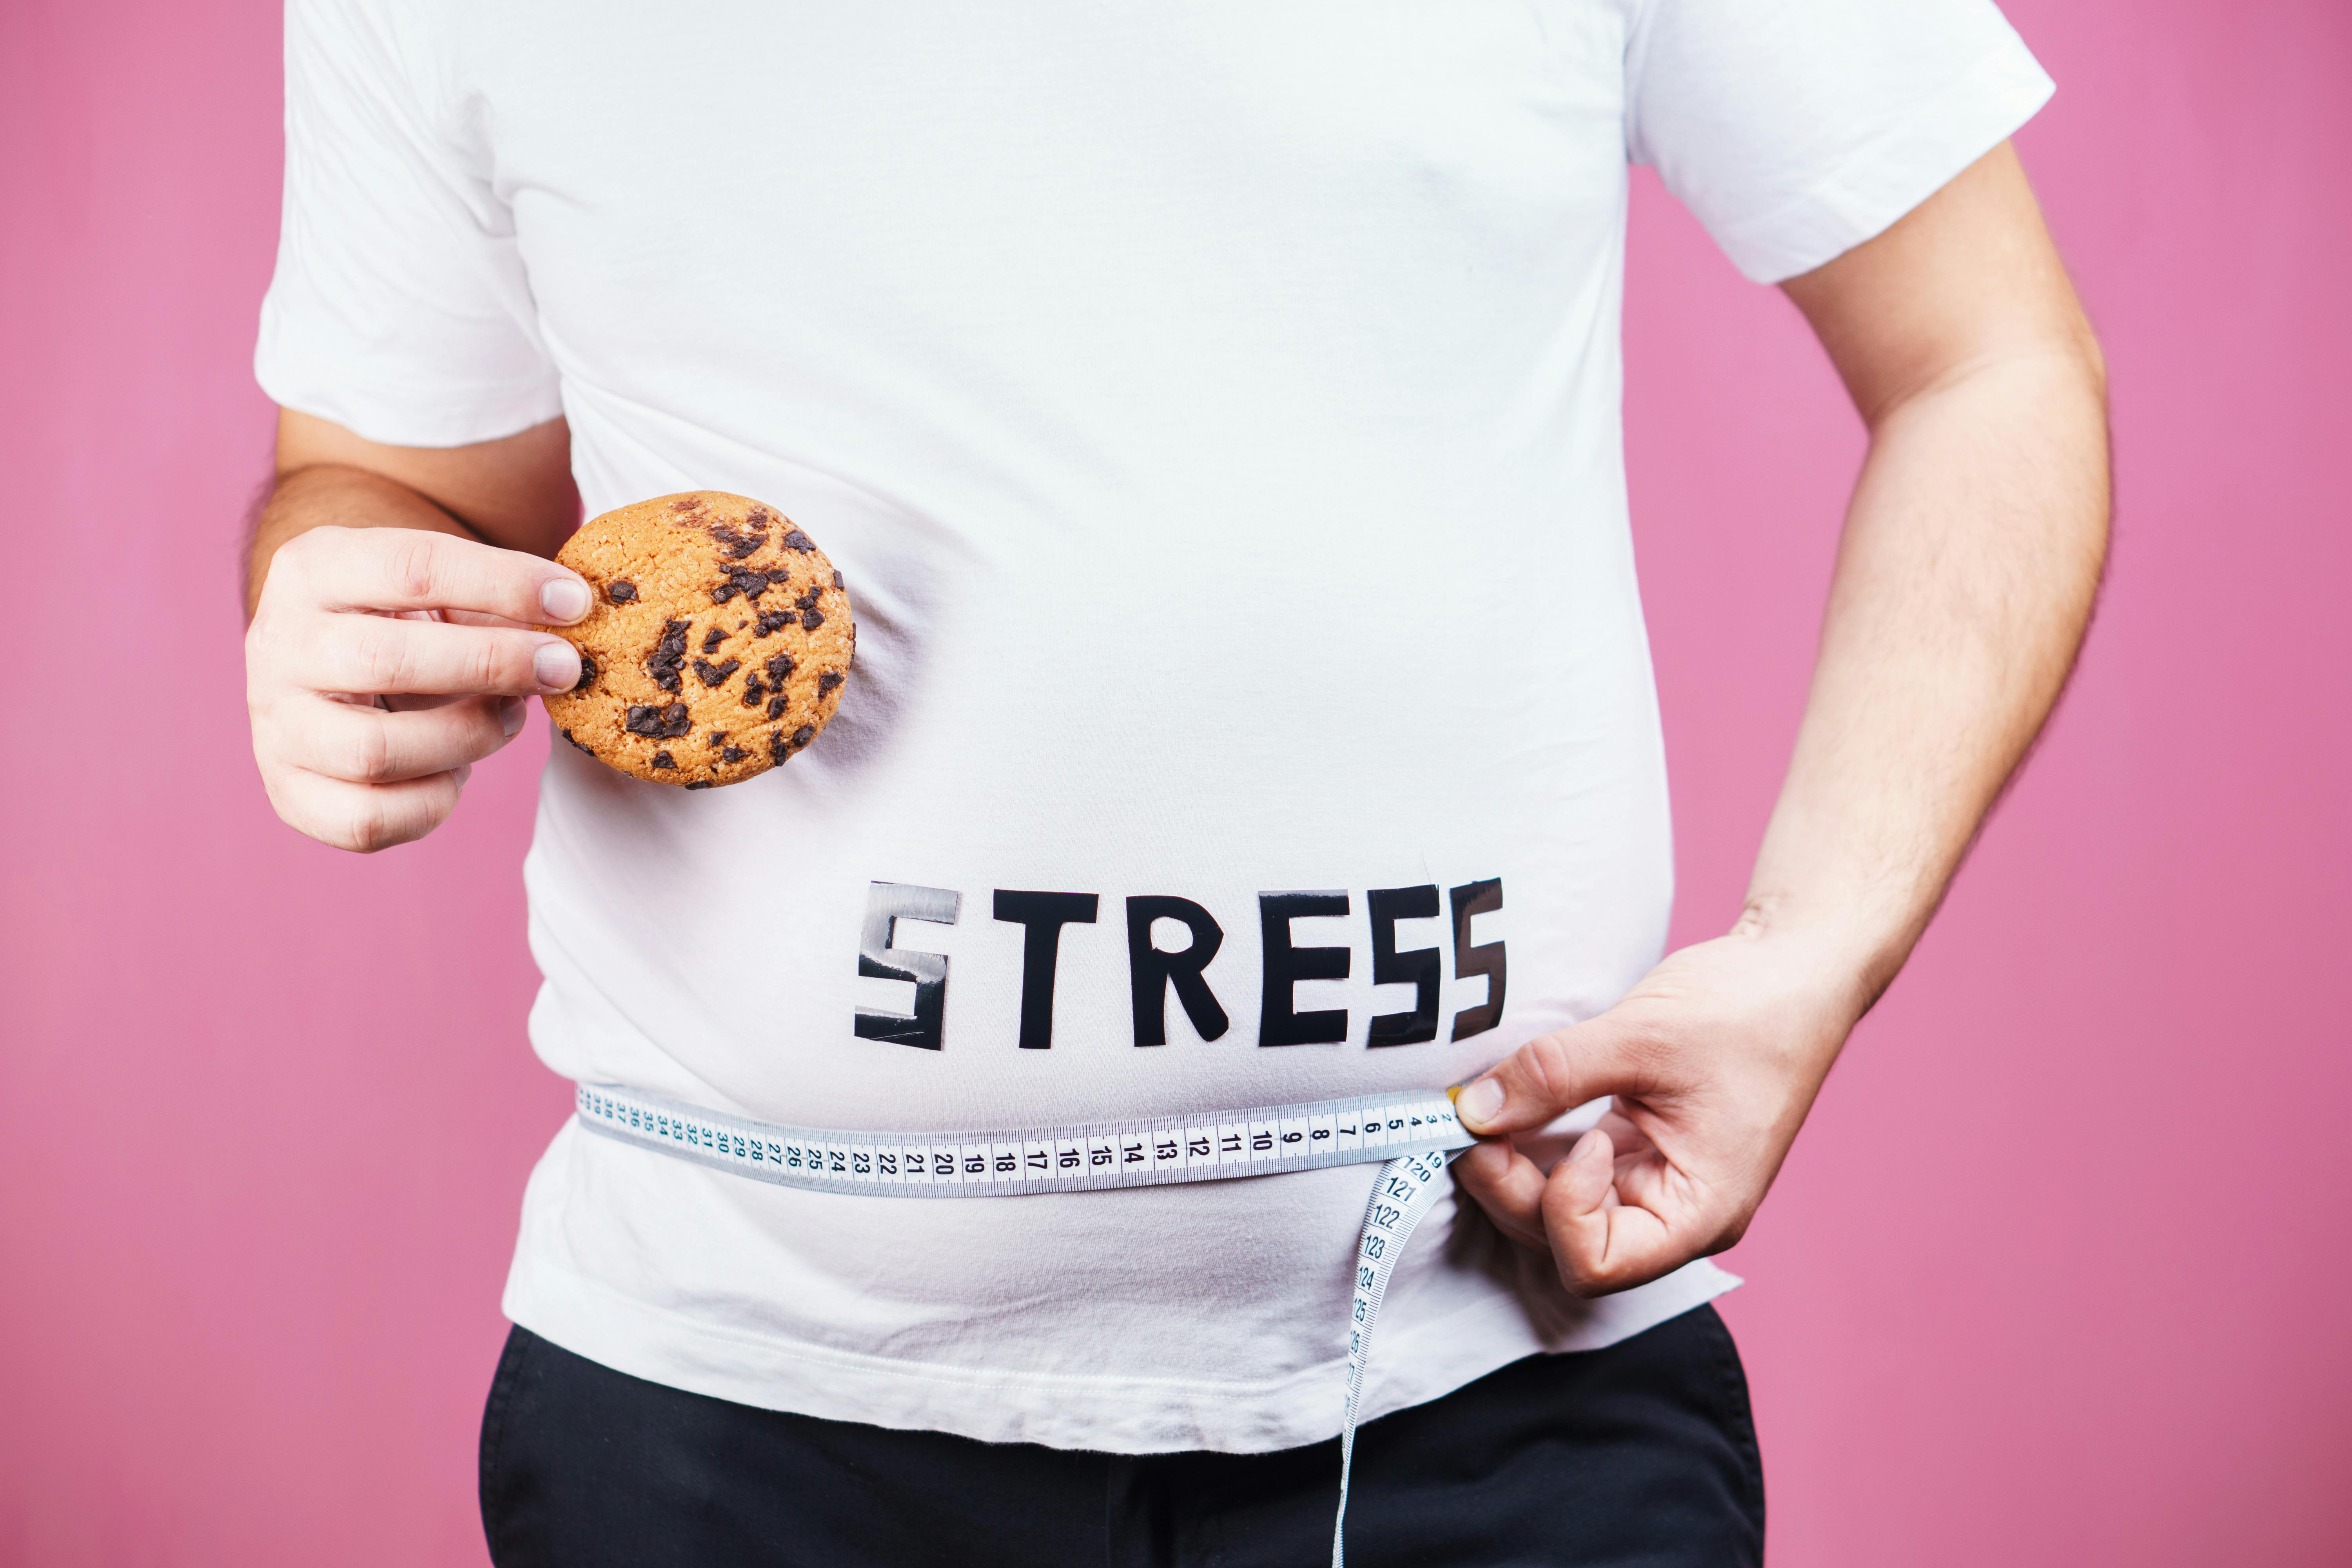 How does stress lead to weight gain